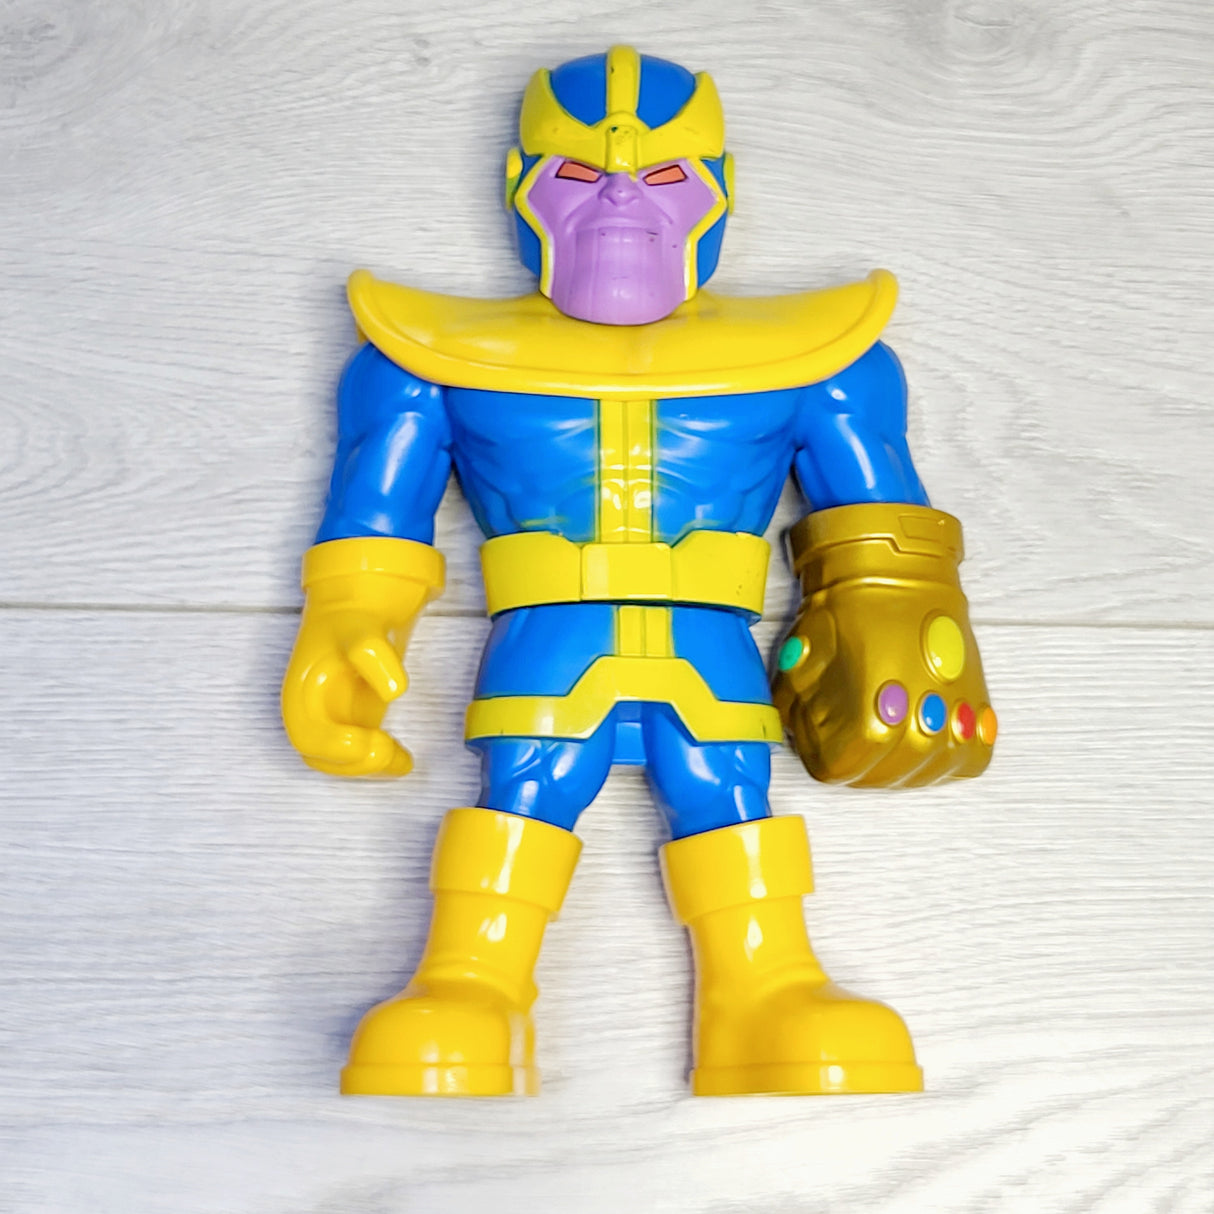 JHTC3 - Playskool Heroes Mighty Minis Thanos action figure